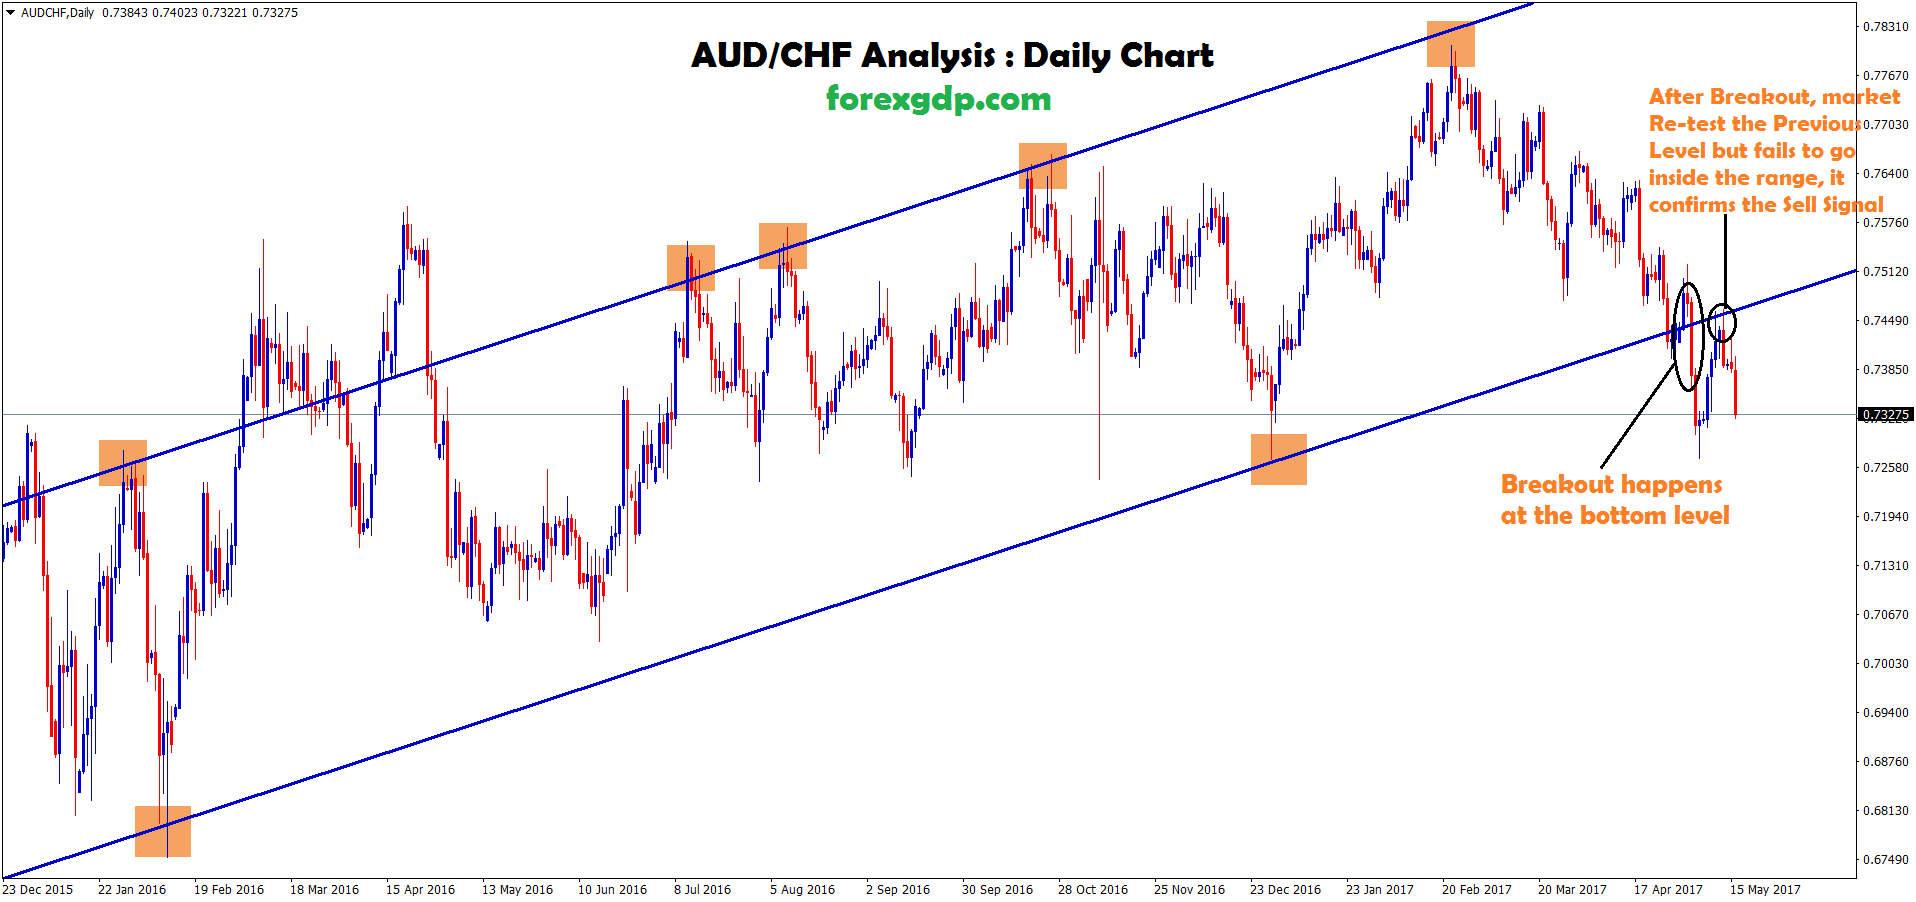 audchf trend line up move